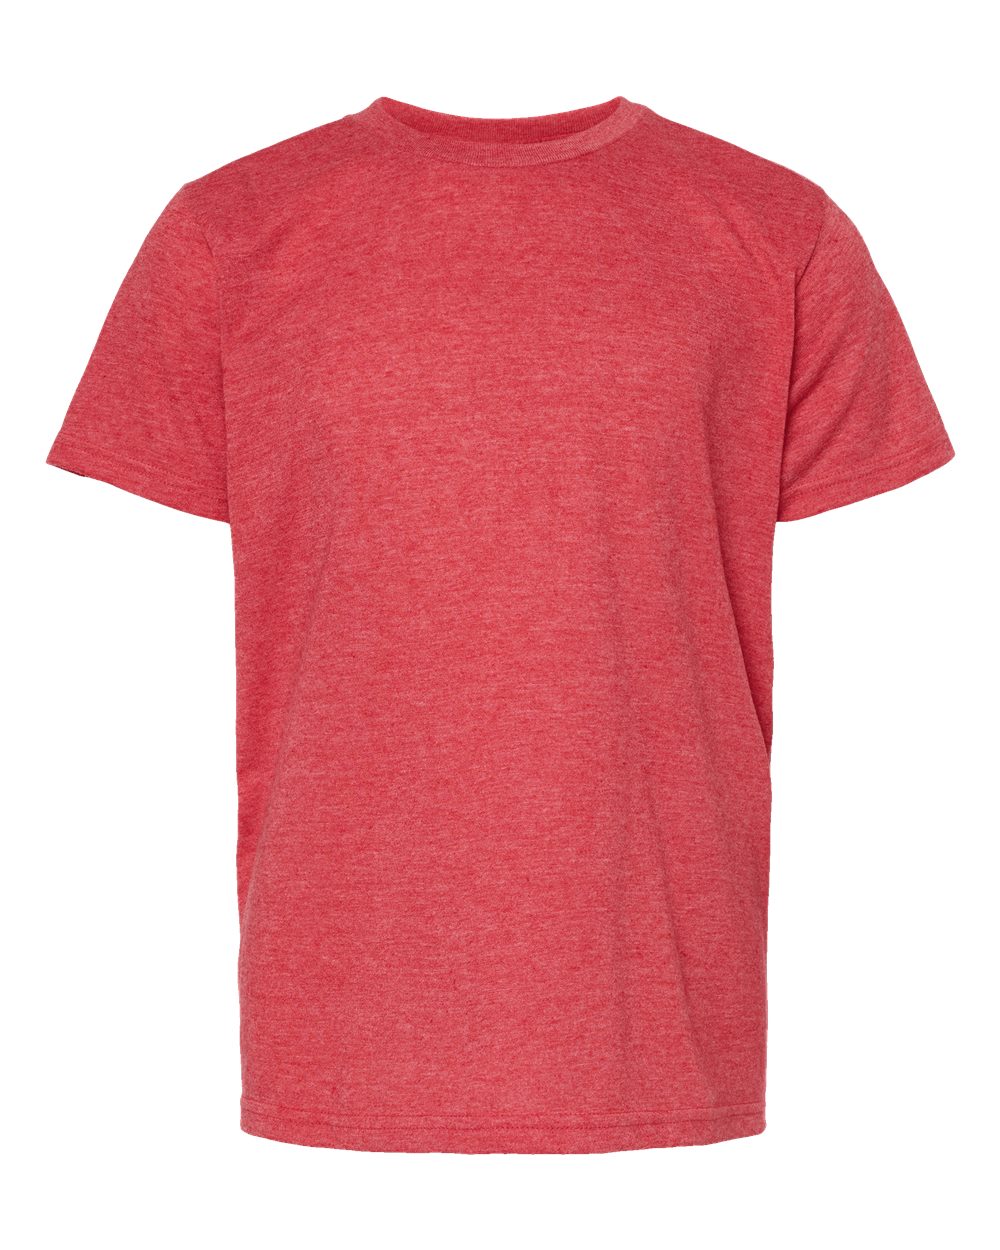 M&O Youth Deluxe Blend T-Shirt 3544 #color_Heather Red